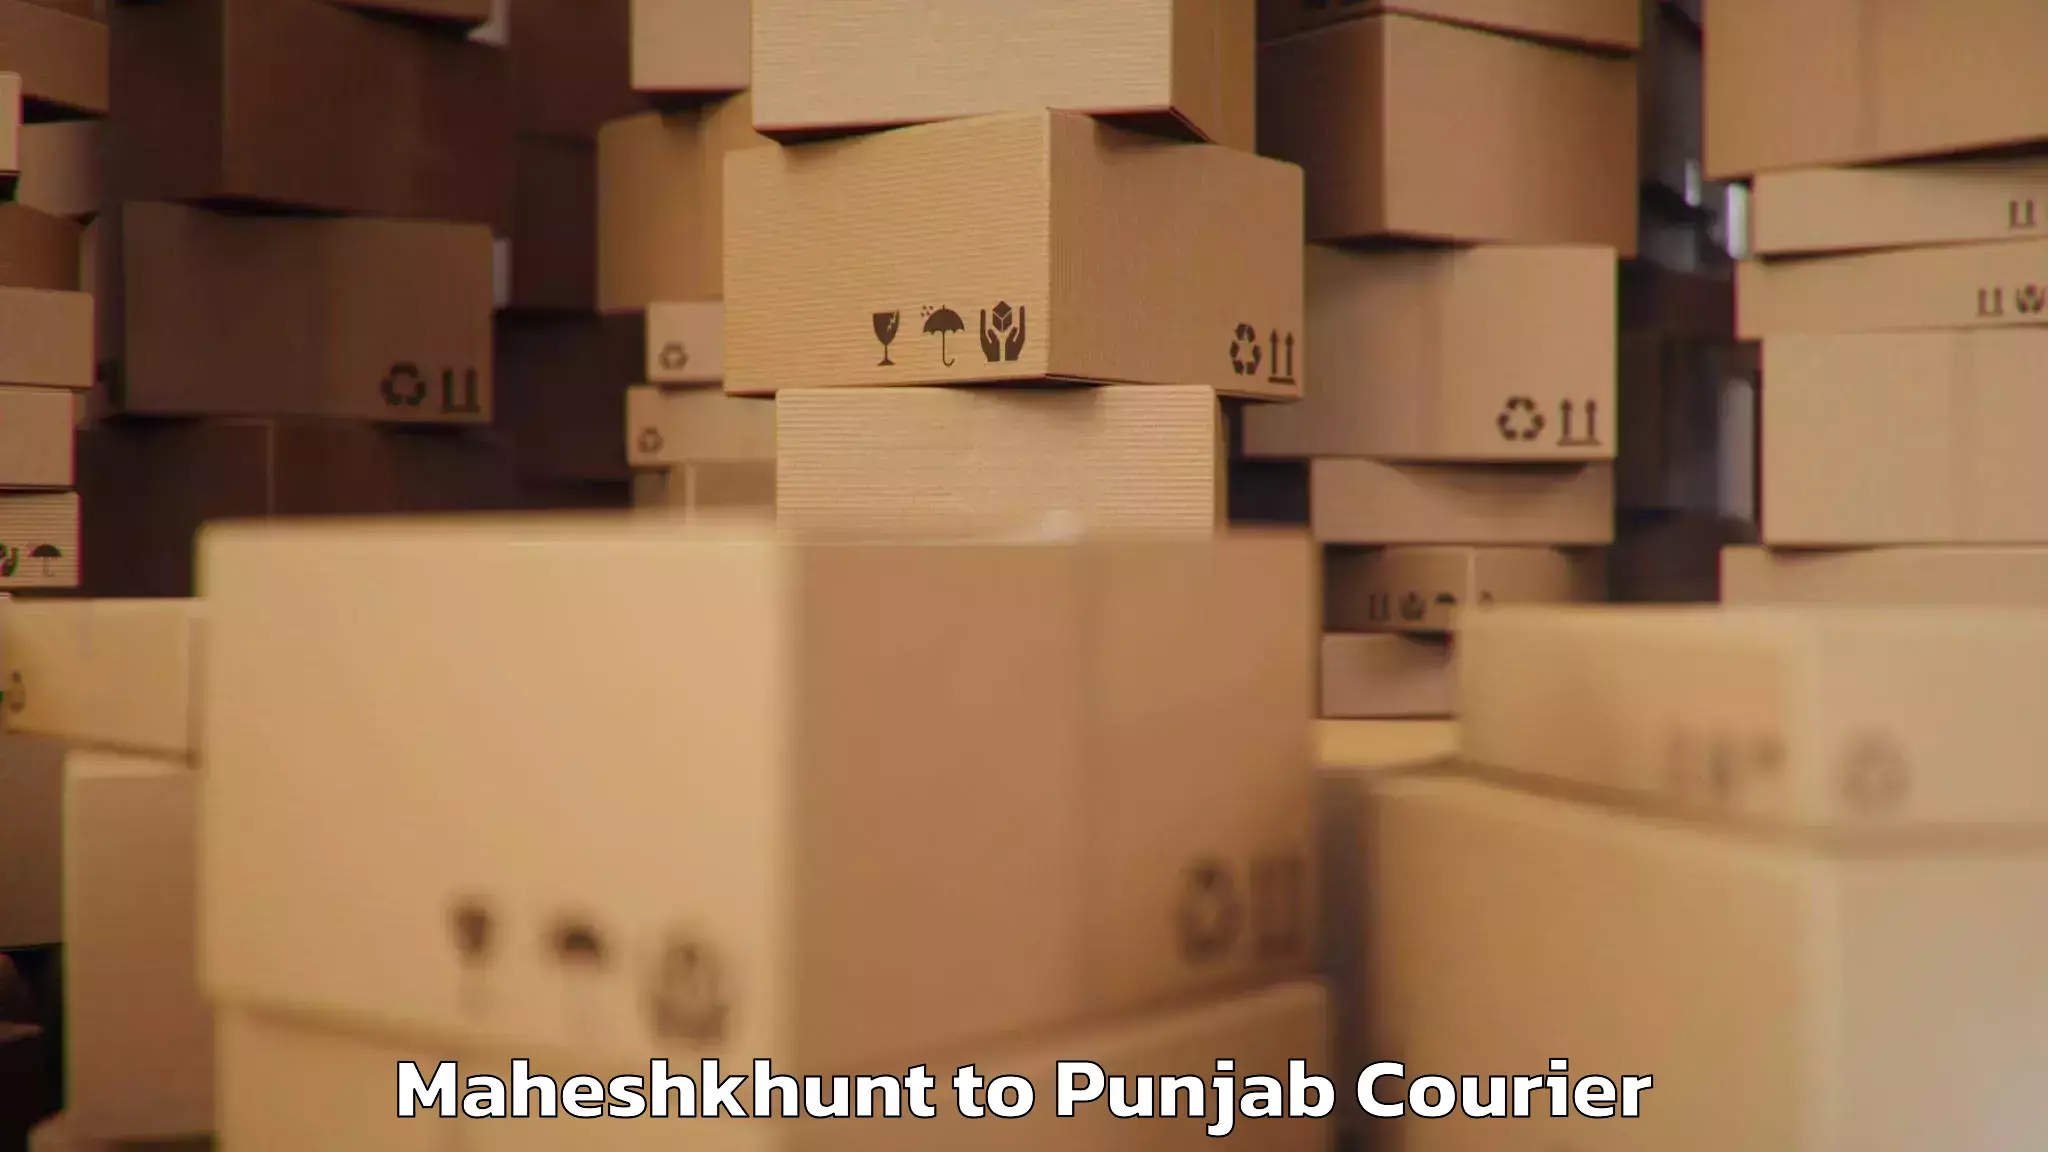 Personal effects shipping in Maheshkhunt to Khanna